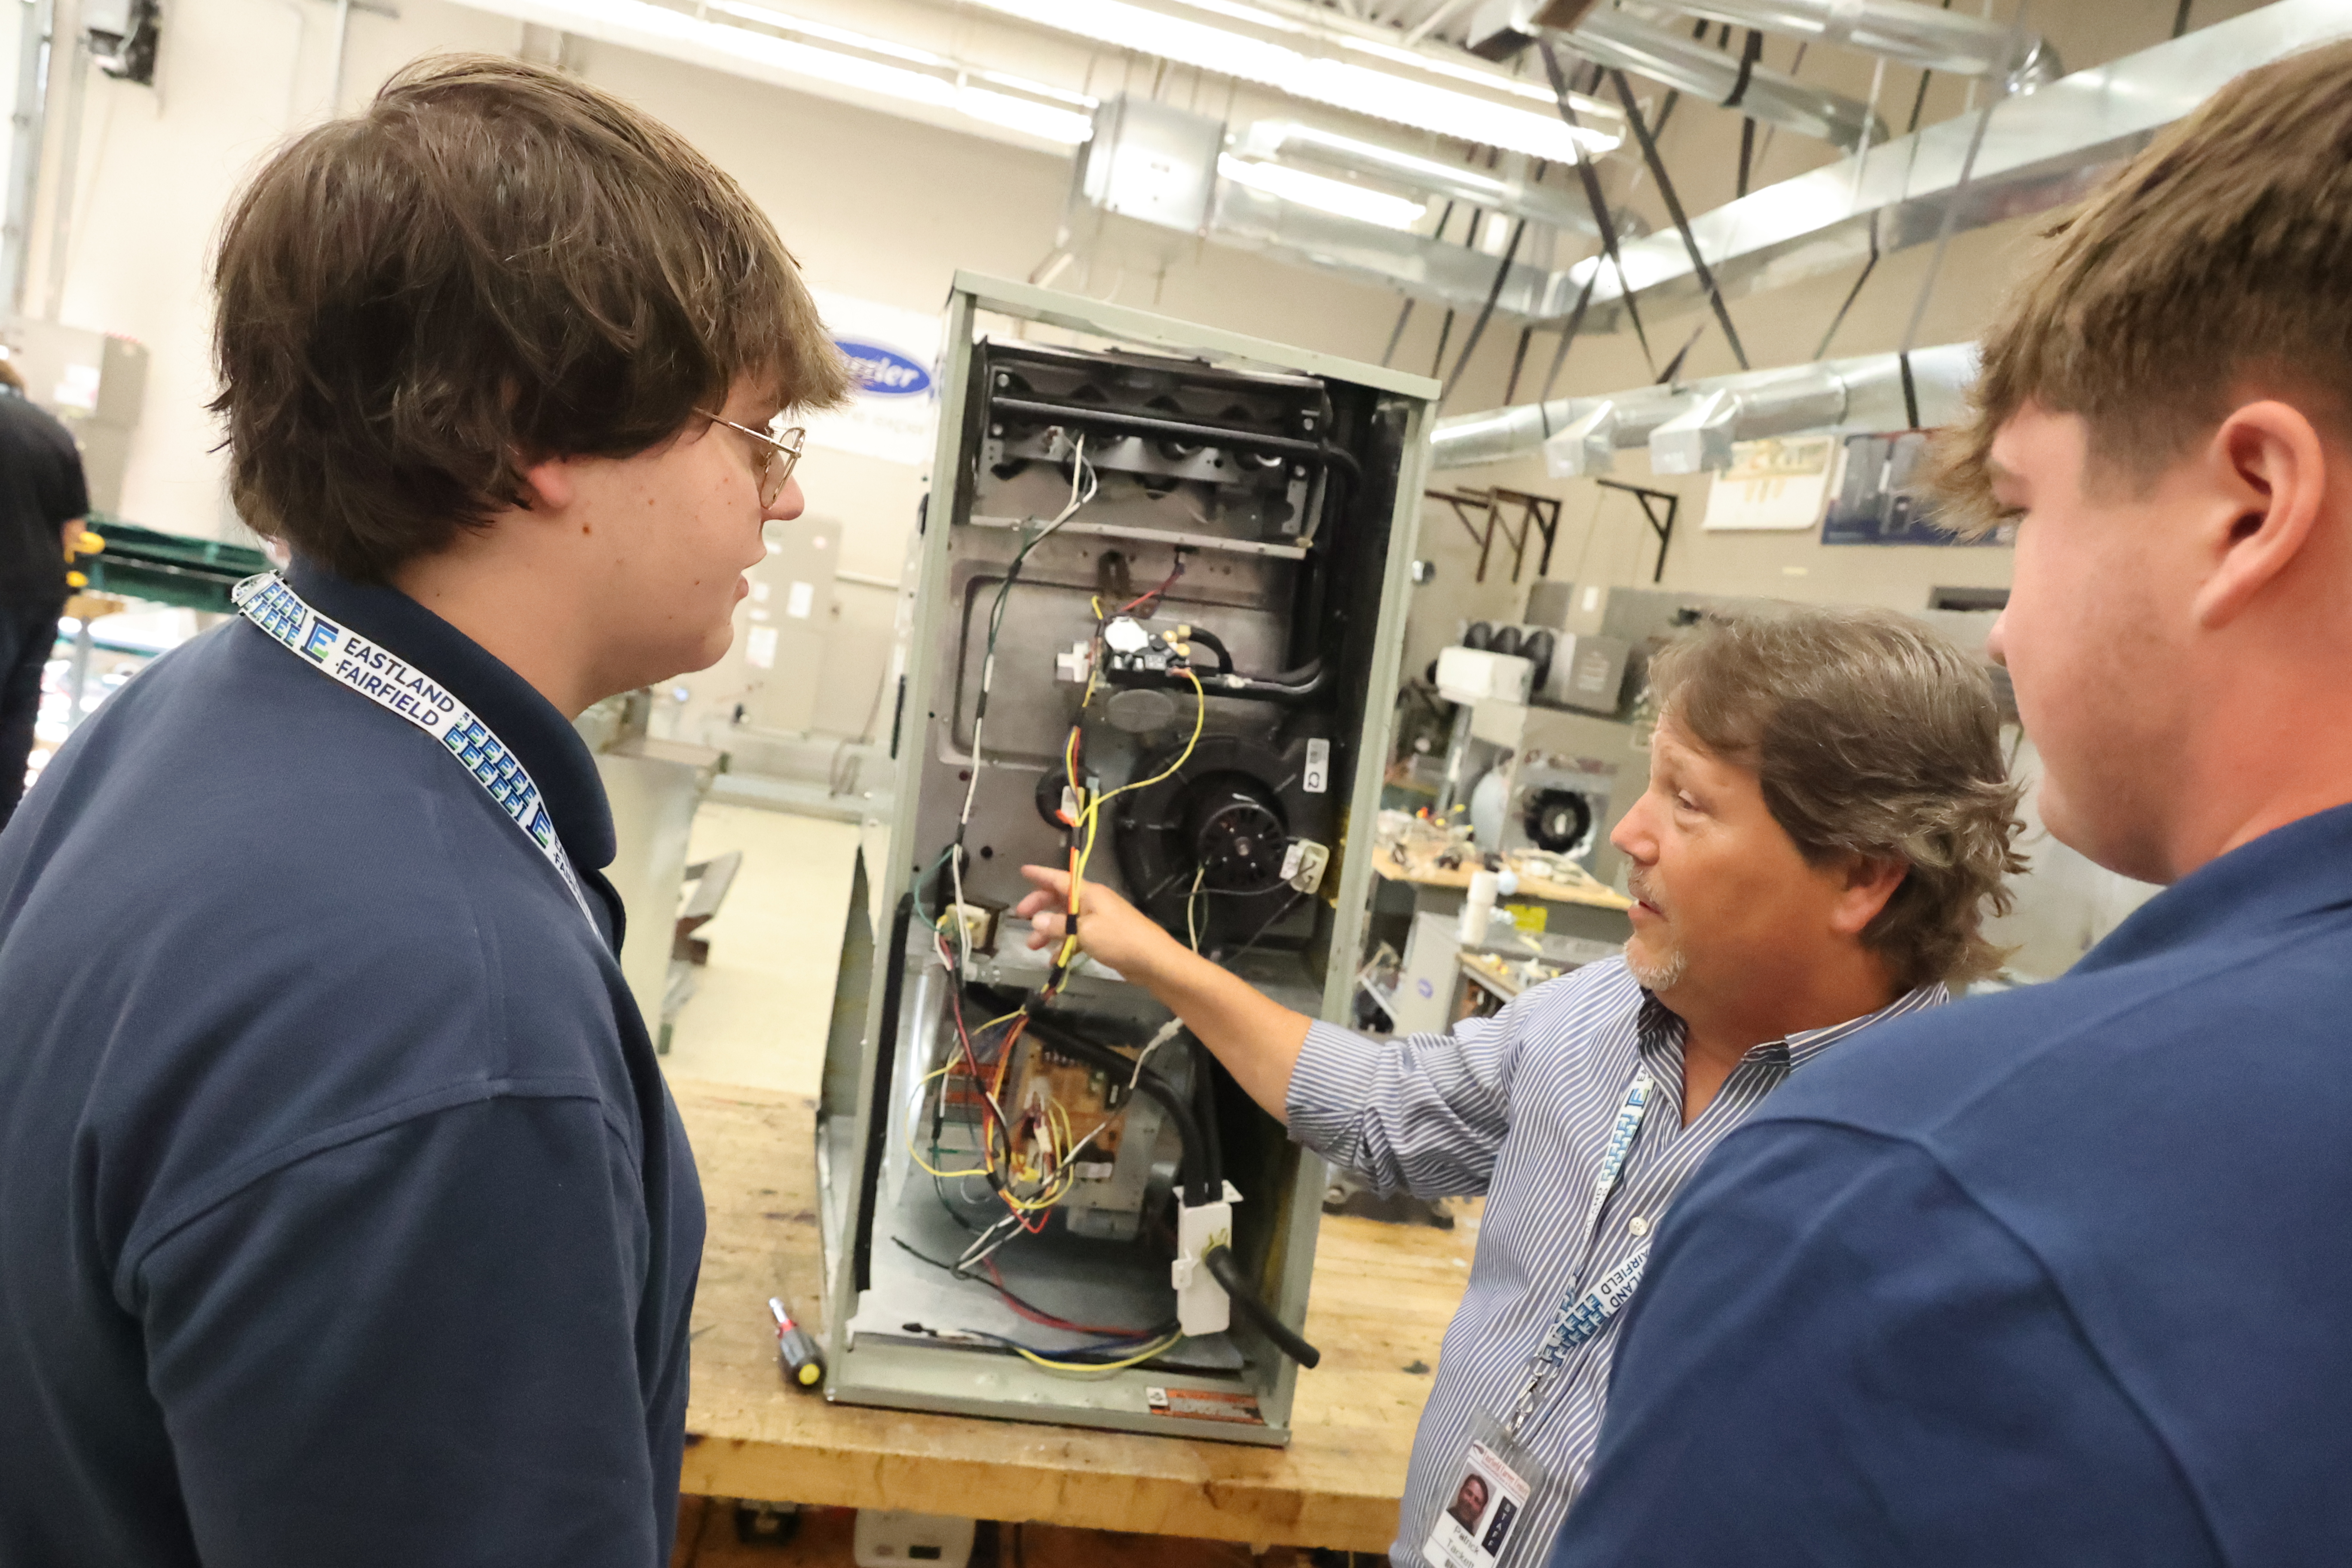 The HVAC instructor reviews the internal parts of a piece of equipment with two students.